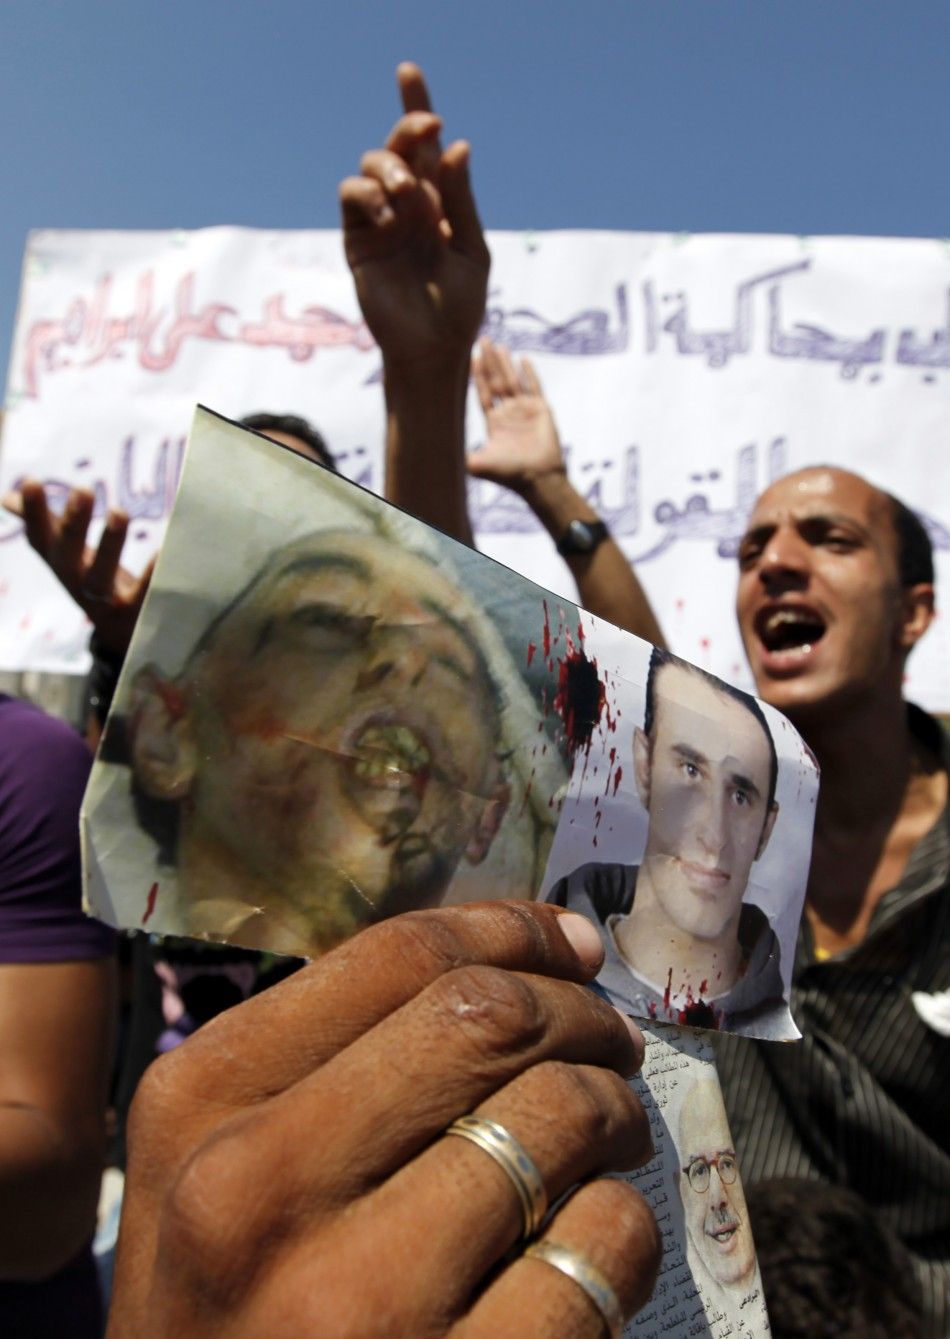 Demonstraters carry pictures of activist Said and chant anti-police slogans outside court building during trial of two p